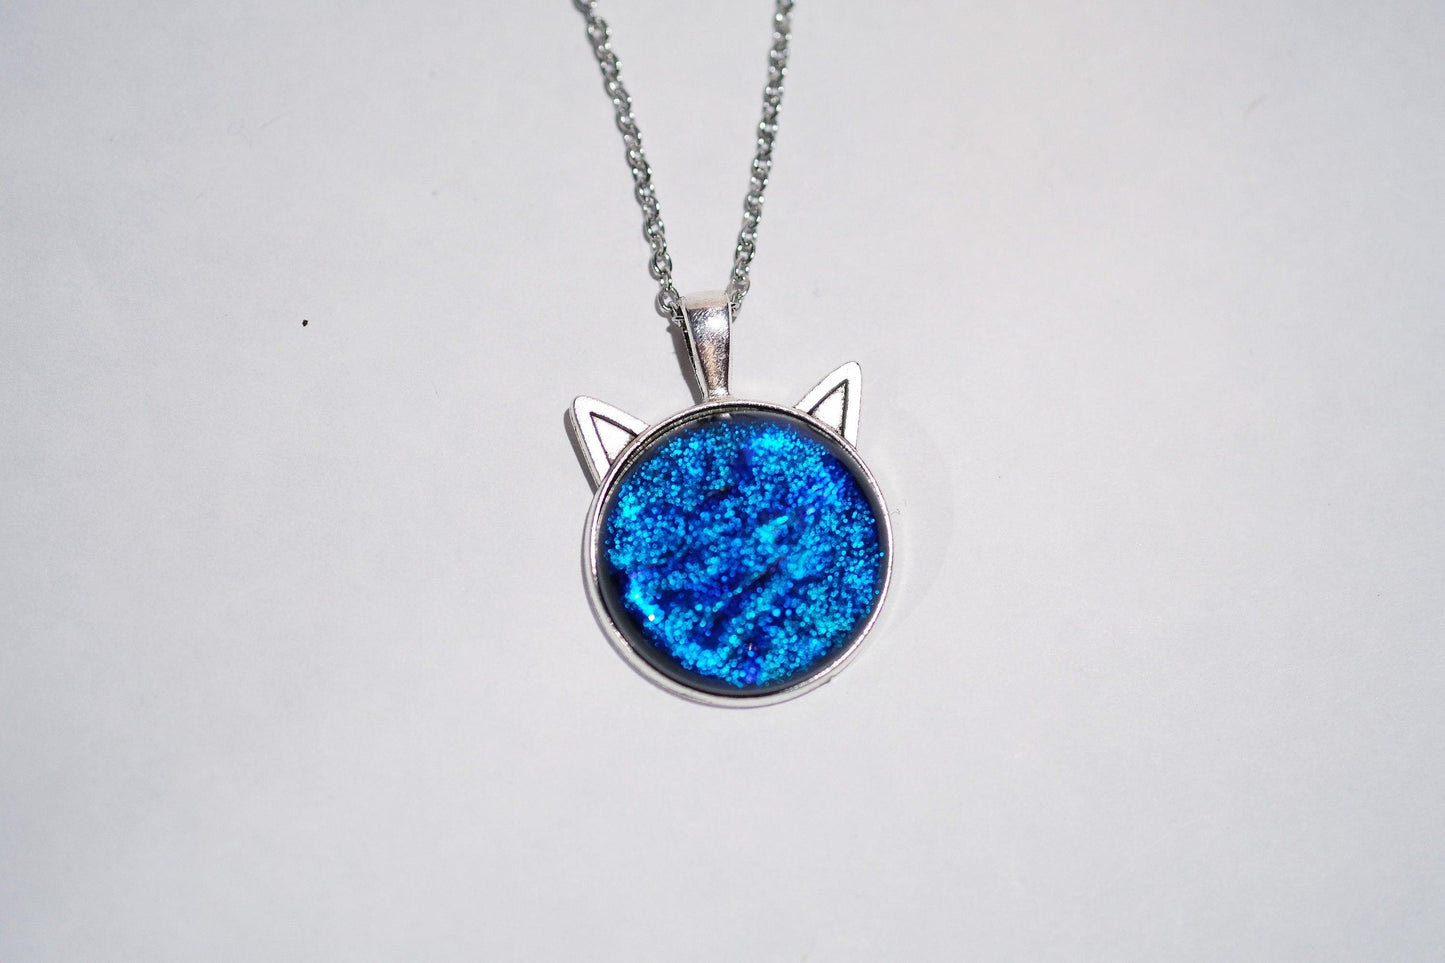 Silver Cat pendant necklace, with blue sparkling dichroic fused glass center stone on a 20 inch steel chain seeds glassworks seedsglassworks